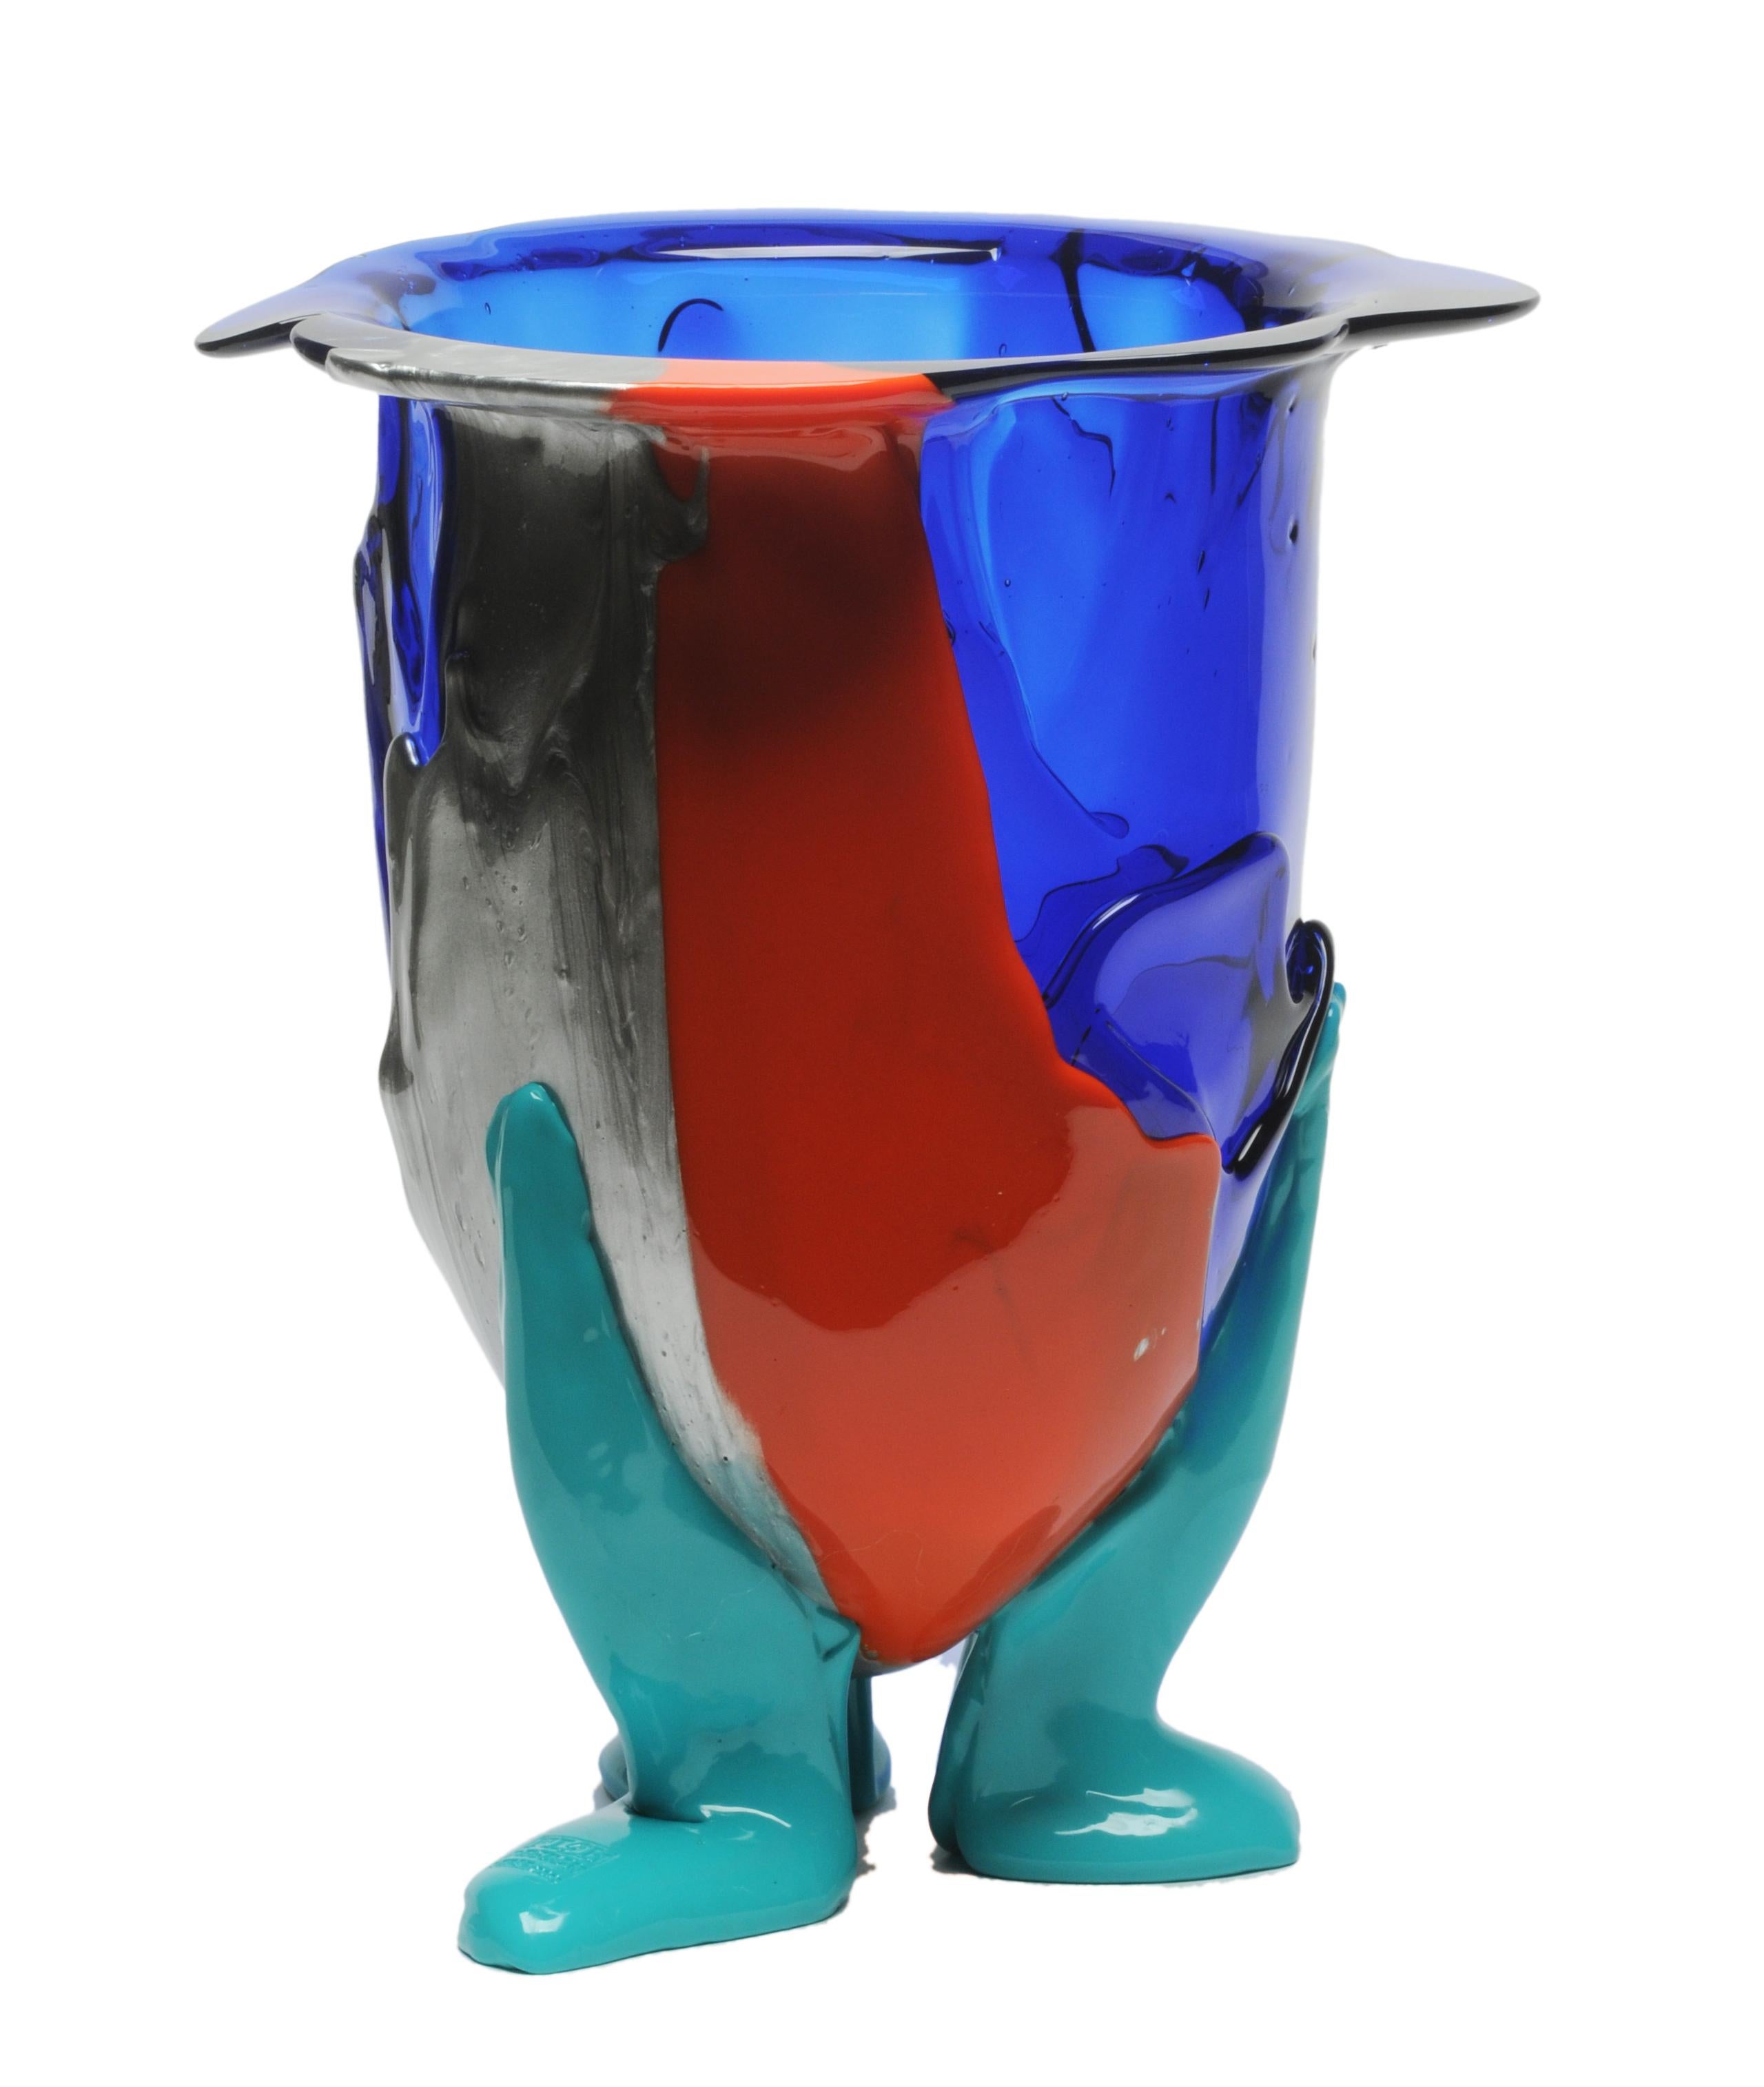 Clear extra colour vase - clear blue, matt red, matt turquoise, silver.

Vase in soft resin designed by Gaetano Pesce in 1995 for Fish Design collection.

Measures: L- Ø 22cm x H 36cm
Colours: clear blue, matt red, matt turquoise, silver.
Other